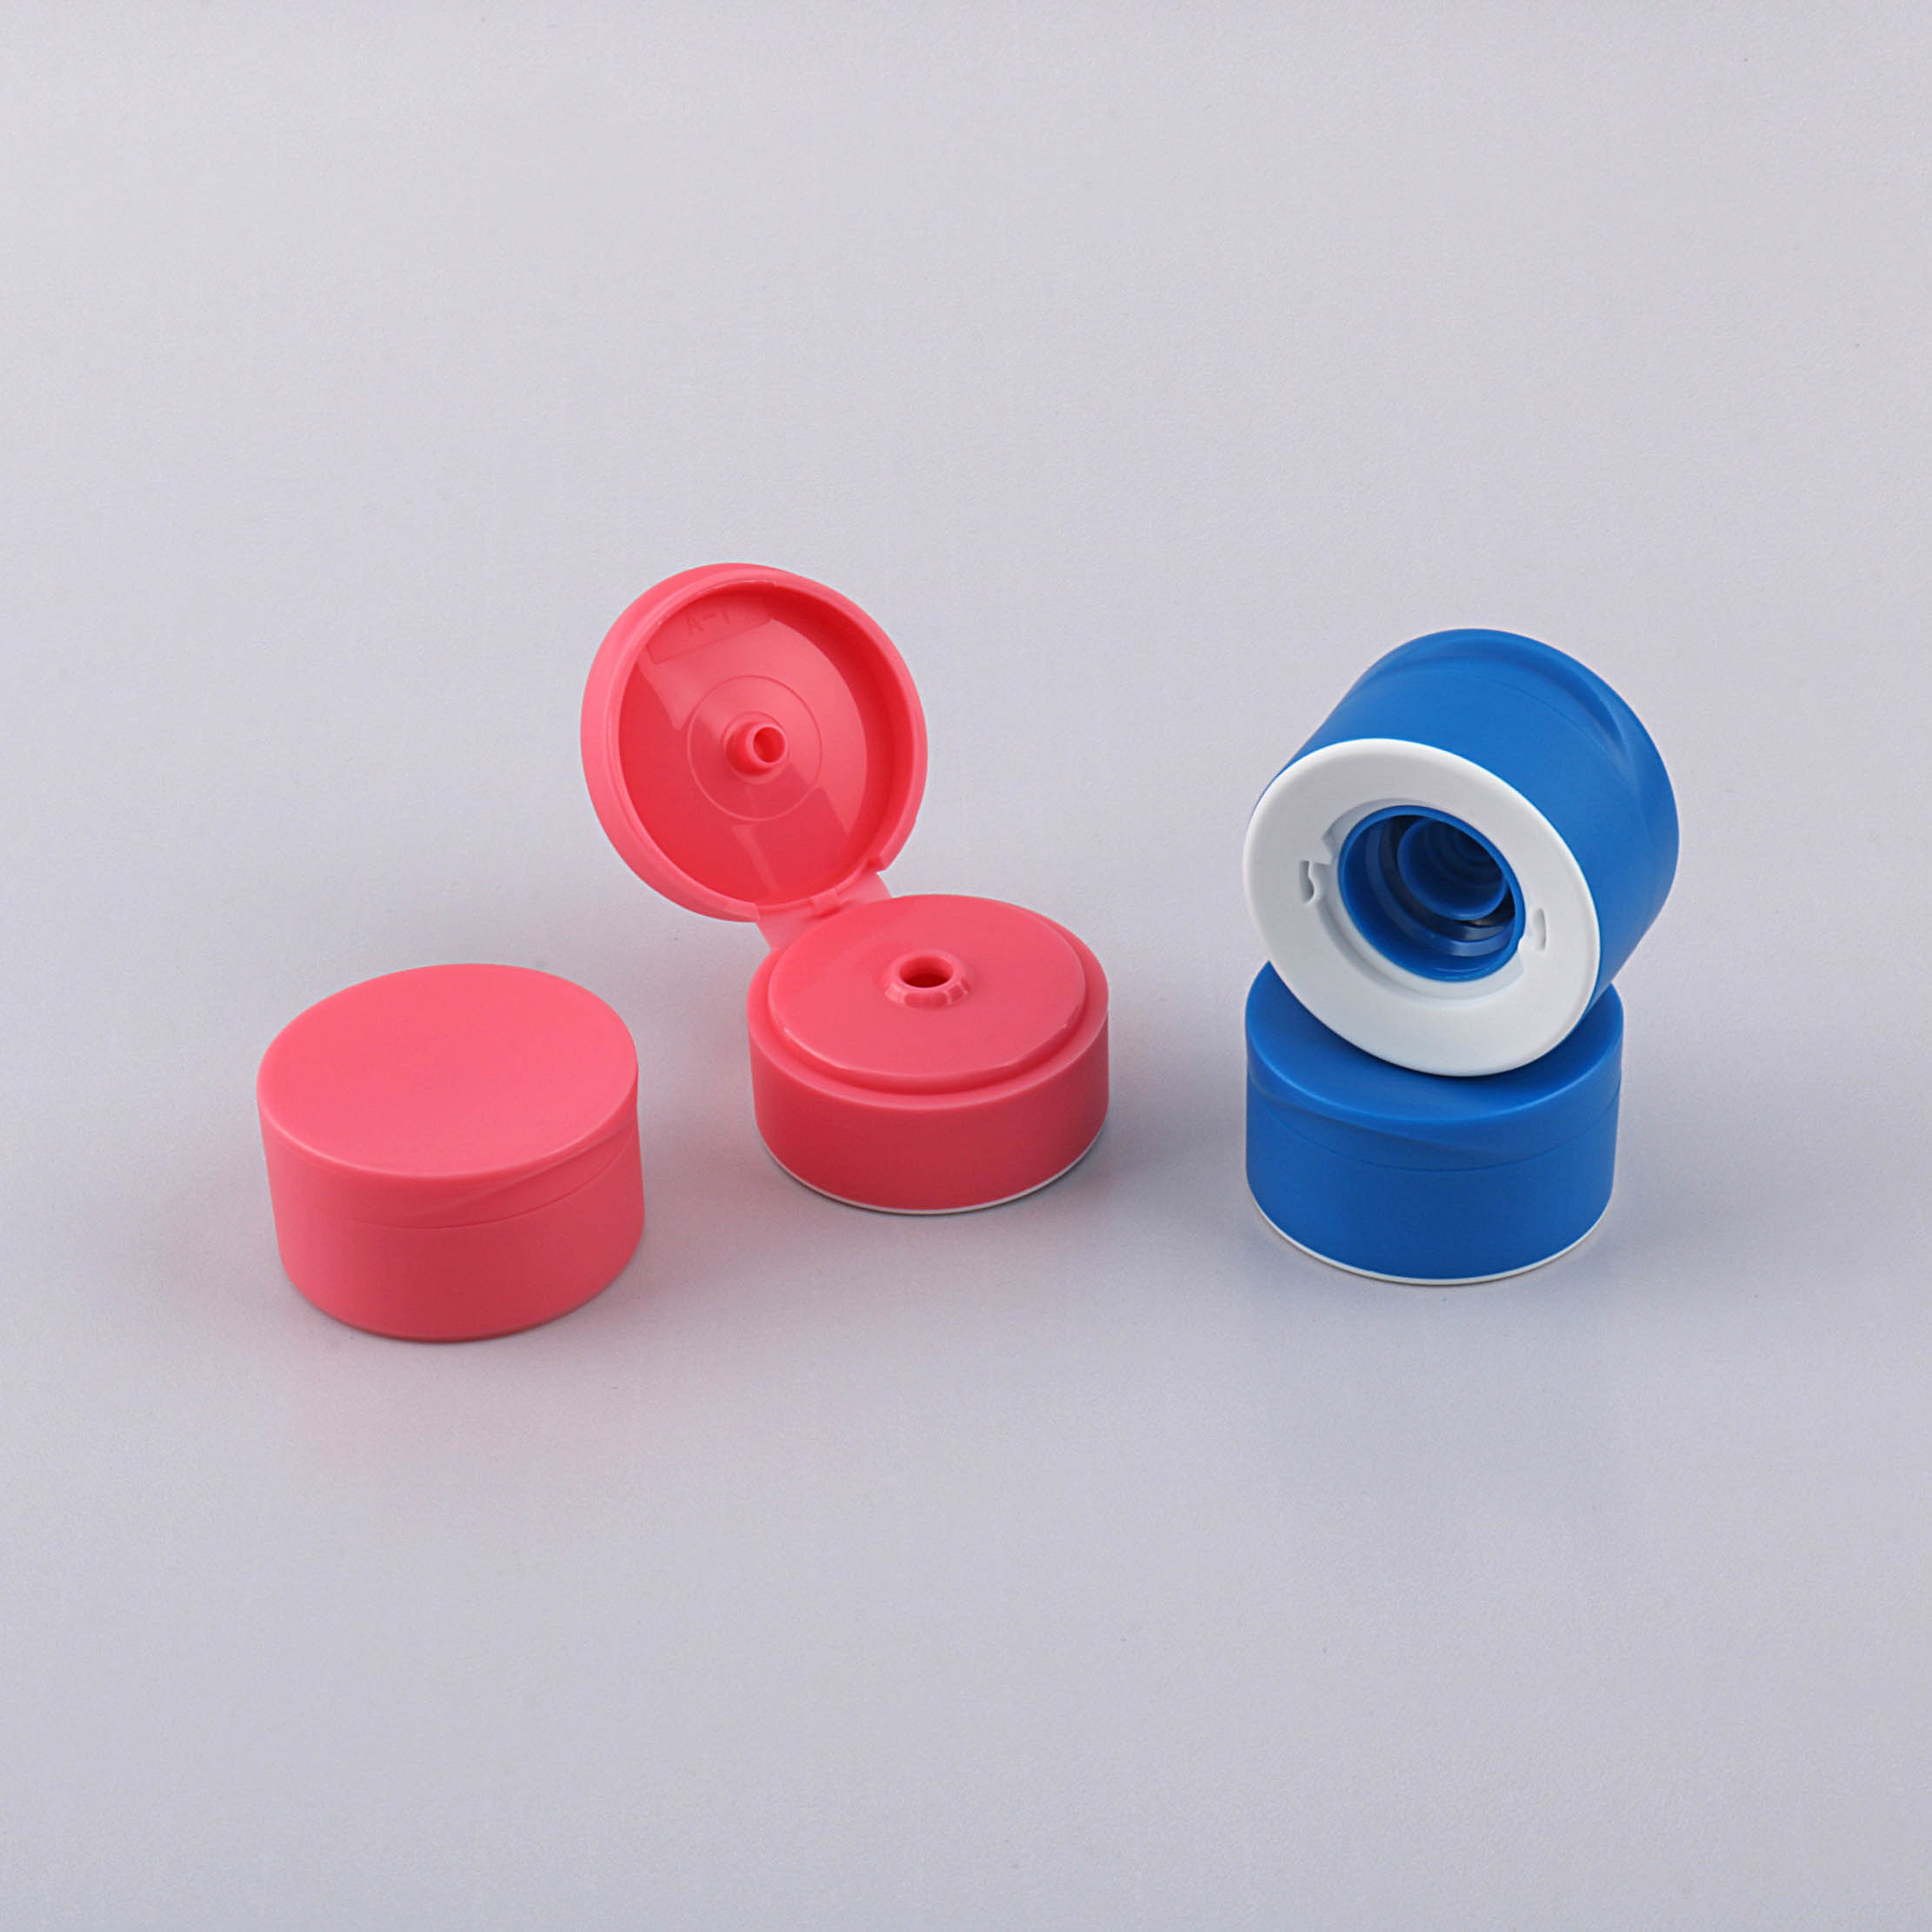 40mm_Diameter_Customized_Cleanser_Tubes_with_Matt_Two-Color_Flip_Top_Caps3